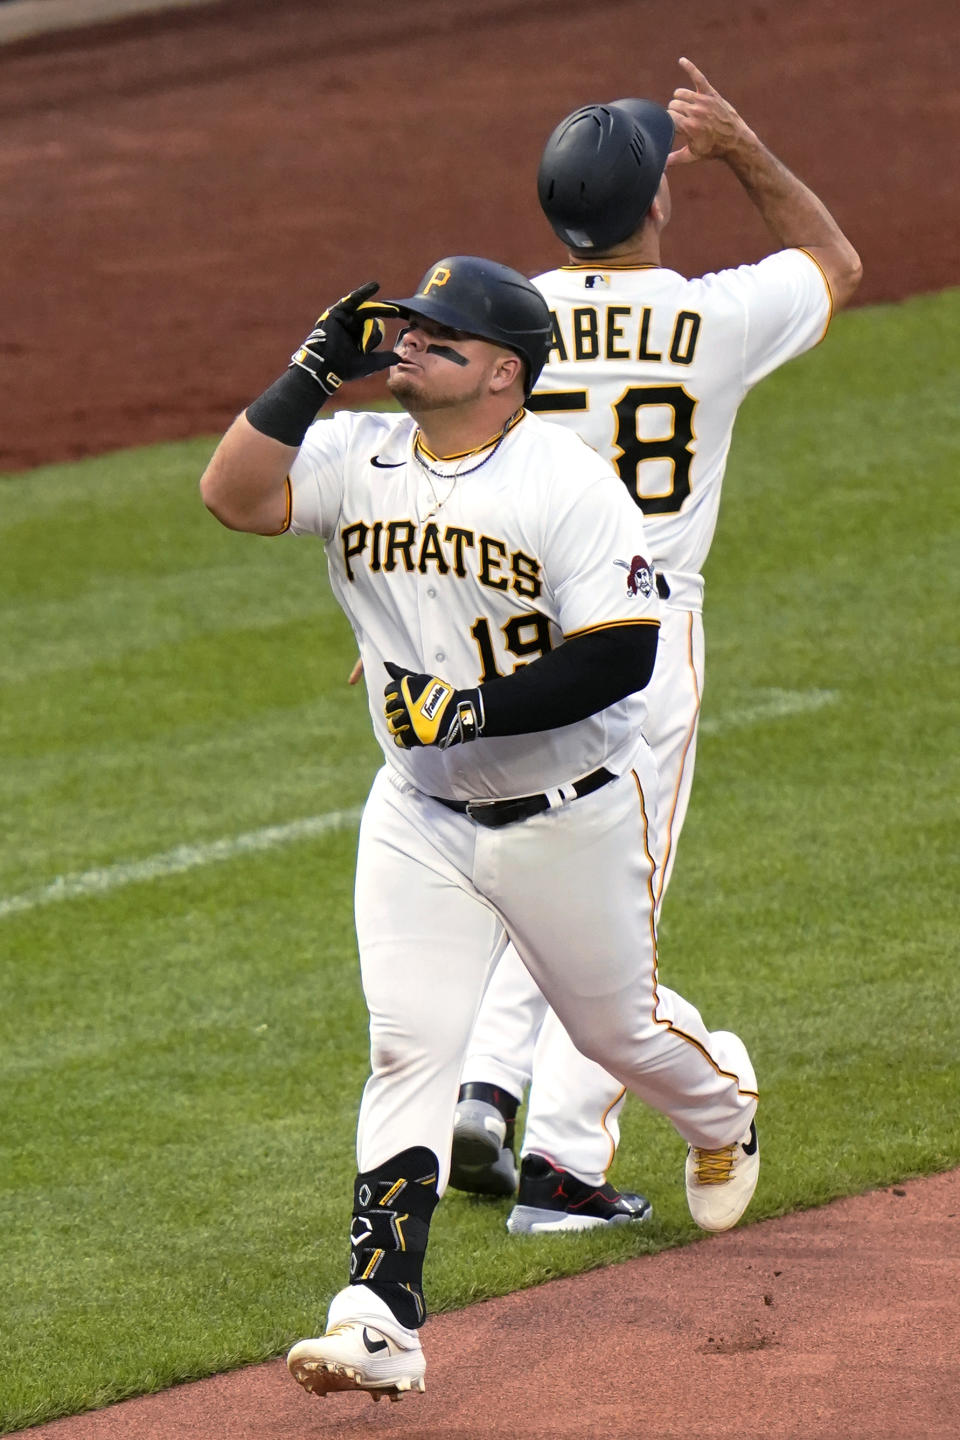 Pittsburgh Pirates' Daniel Vogelbach (19) celebrates with third base coach Mike Rabelo after hitting a solo home run off Cincinnati Reds starting pitcher Luis Castillo during the fourth inning of a baseball game in Pittsburgh, Saturday, May 14, 2022. (AP Photo/Gene J. Puskar)